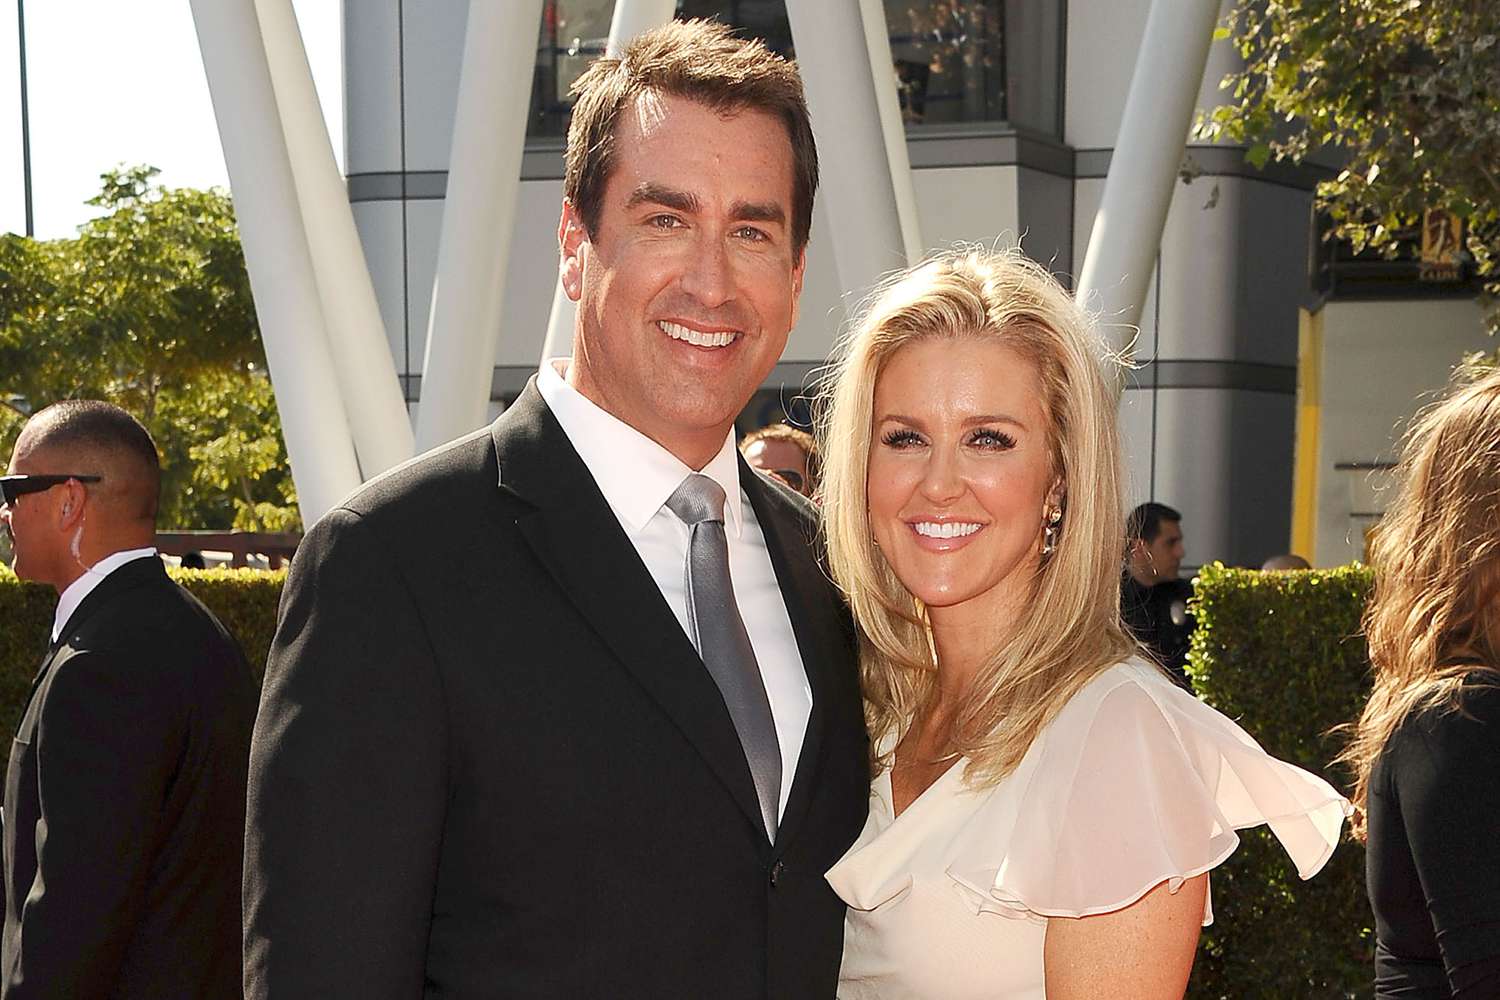 Comedian Rob Riggle s Wife Tiffany Files for Divorce PEOPLE com. 